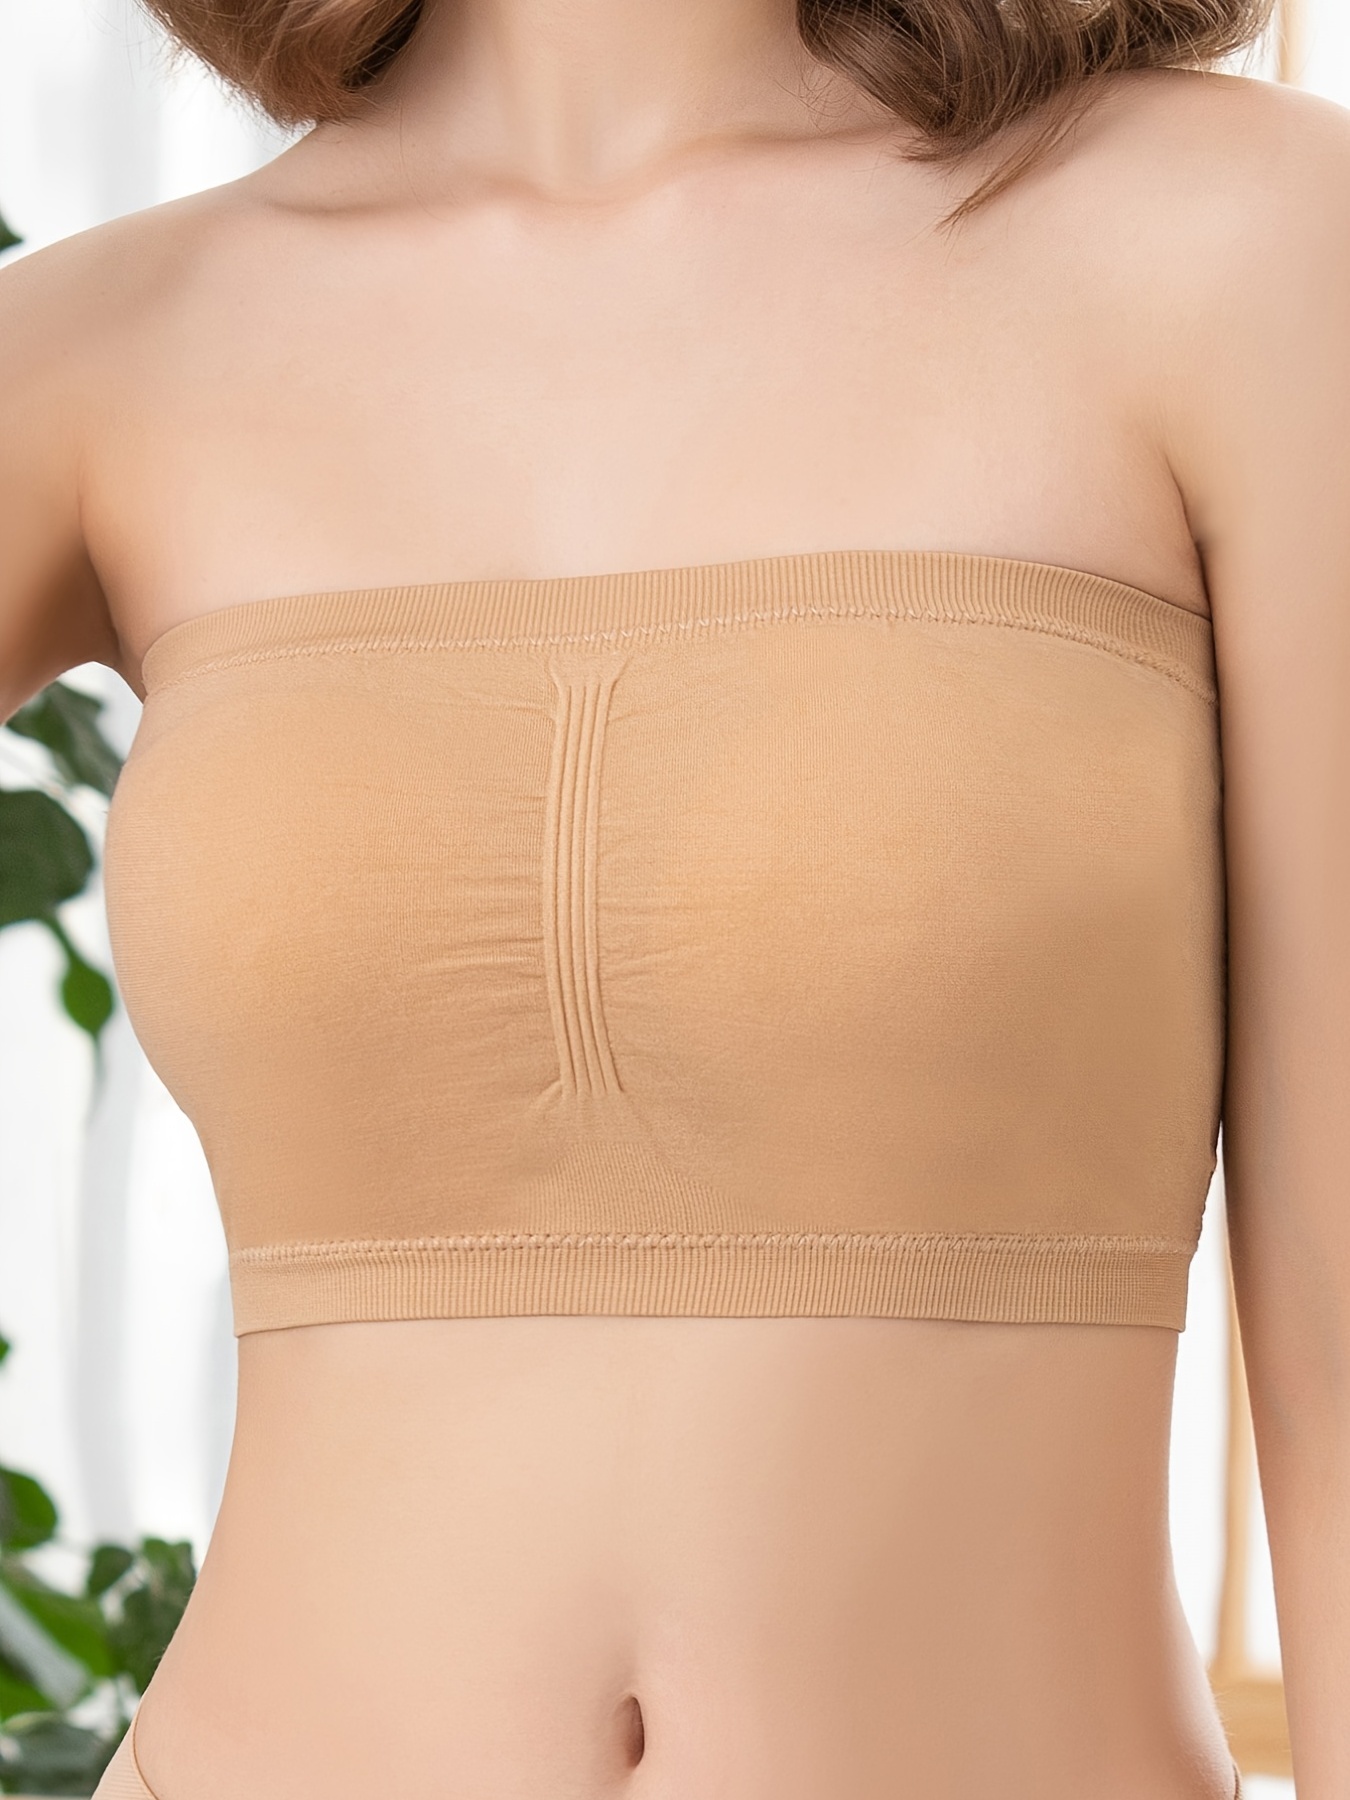 Women Strapless Padded Bra, Seamless Stretchy Tube Top, Breathable & Comfort